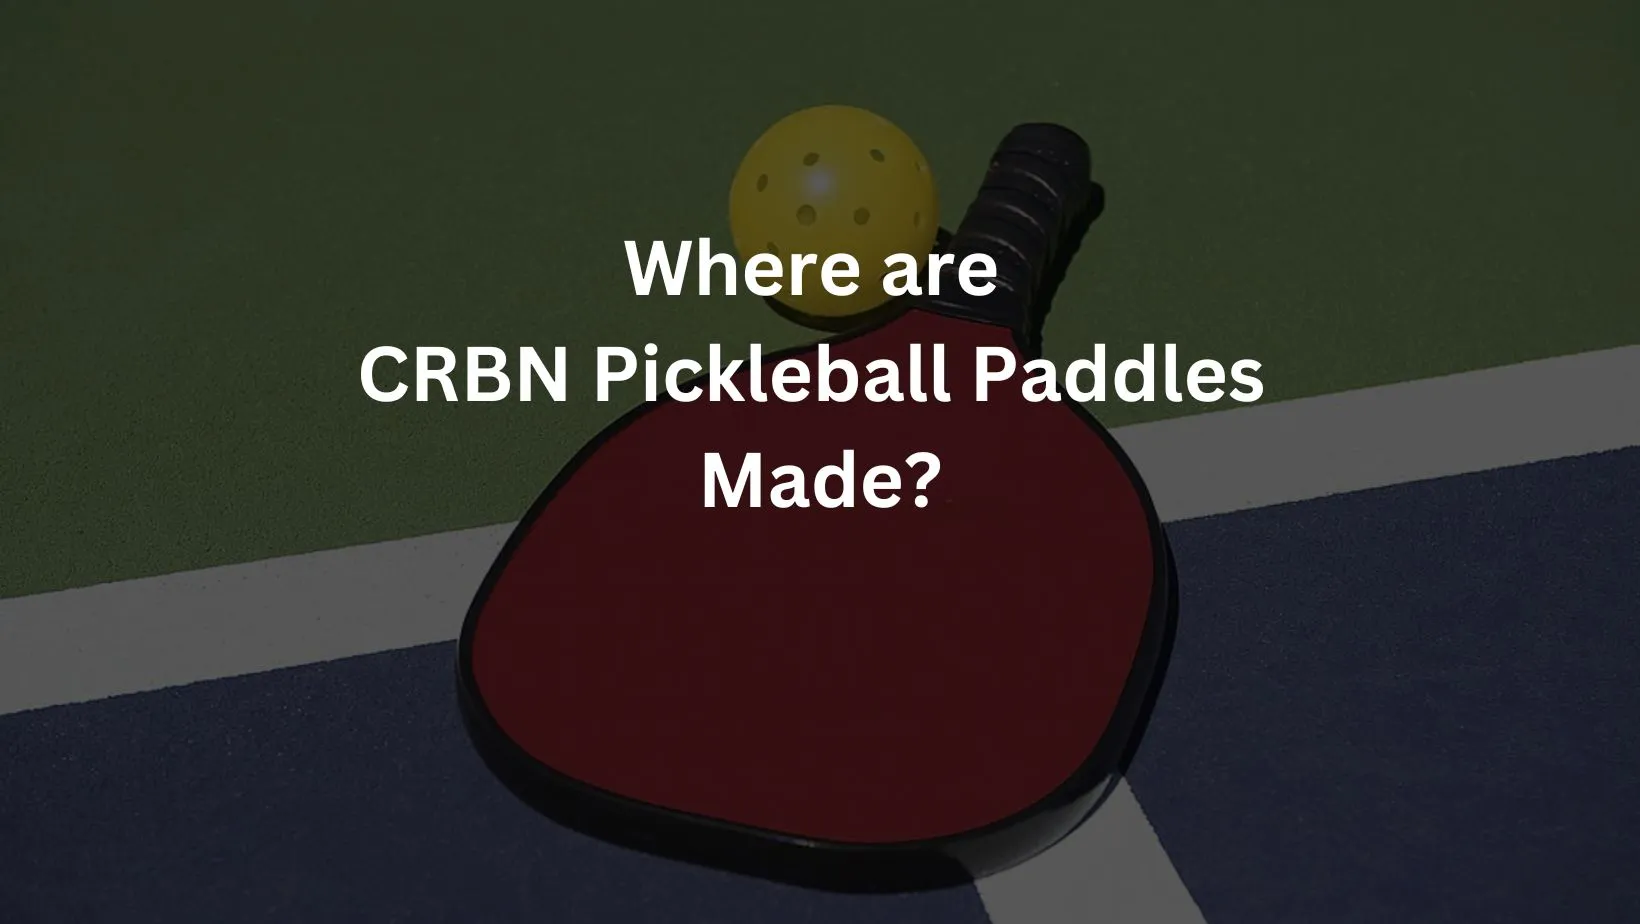 where are CRBN pickleball paddles made